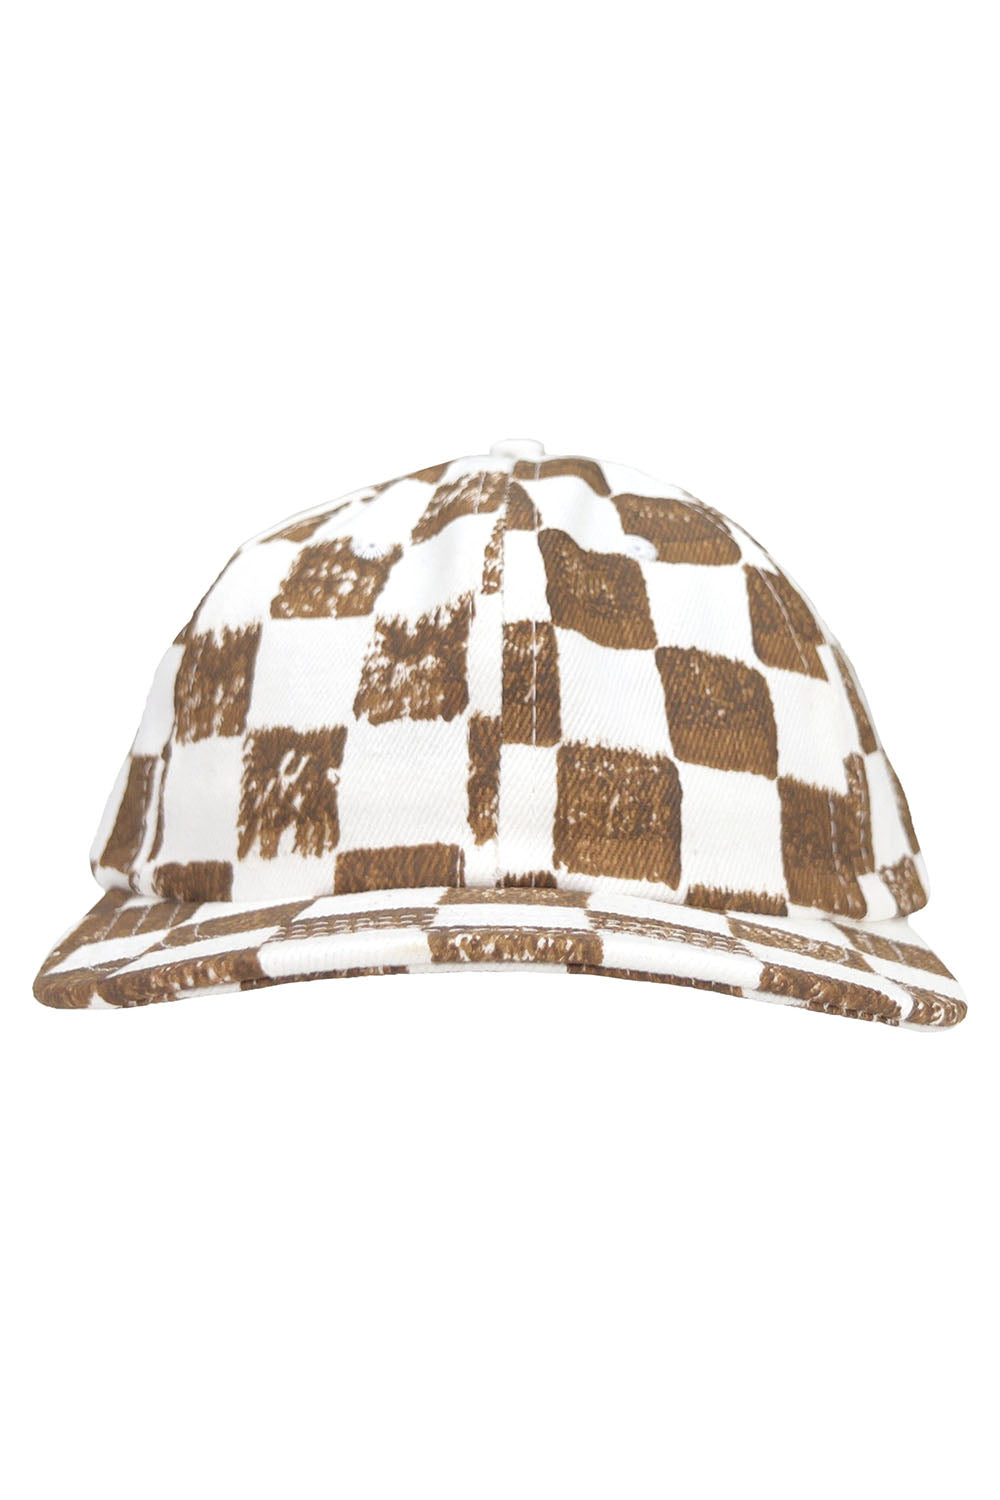 Checkerboard Chenga Cap | Jungmaven Hemp Clothing & Accessories / Color: Coyote Checker on Washed White